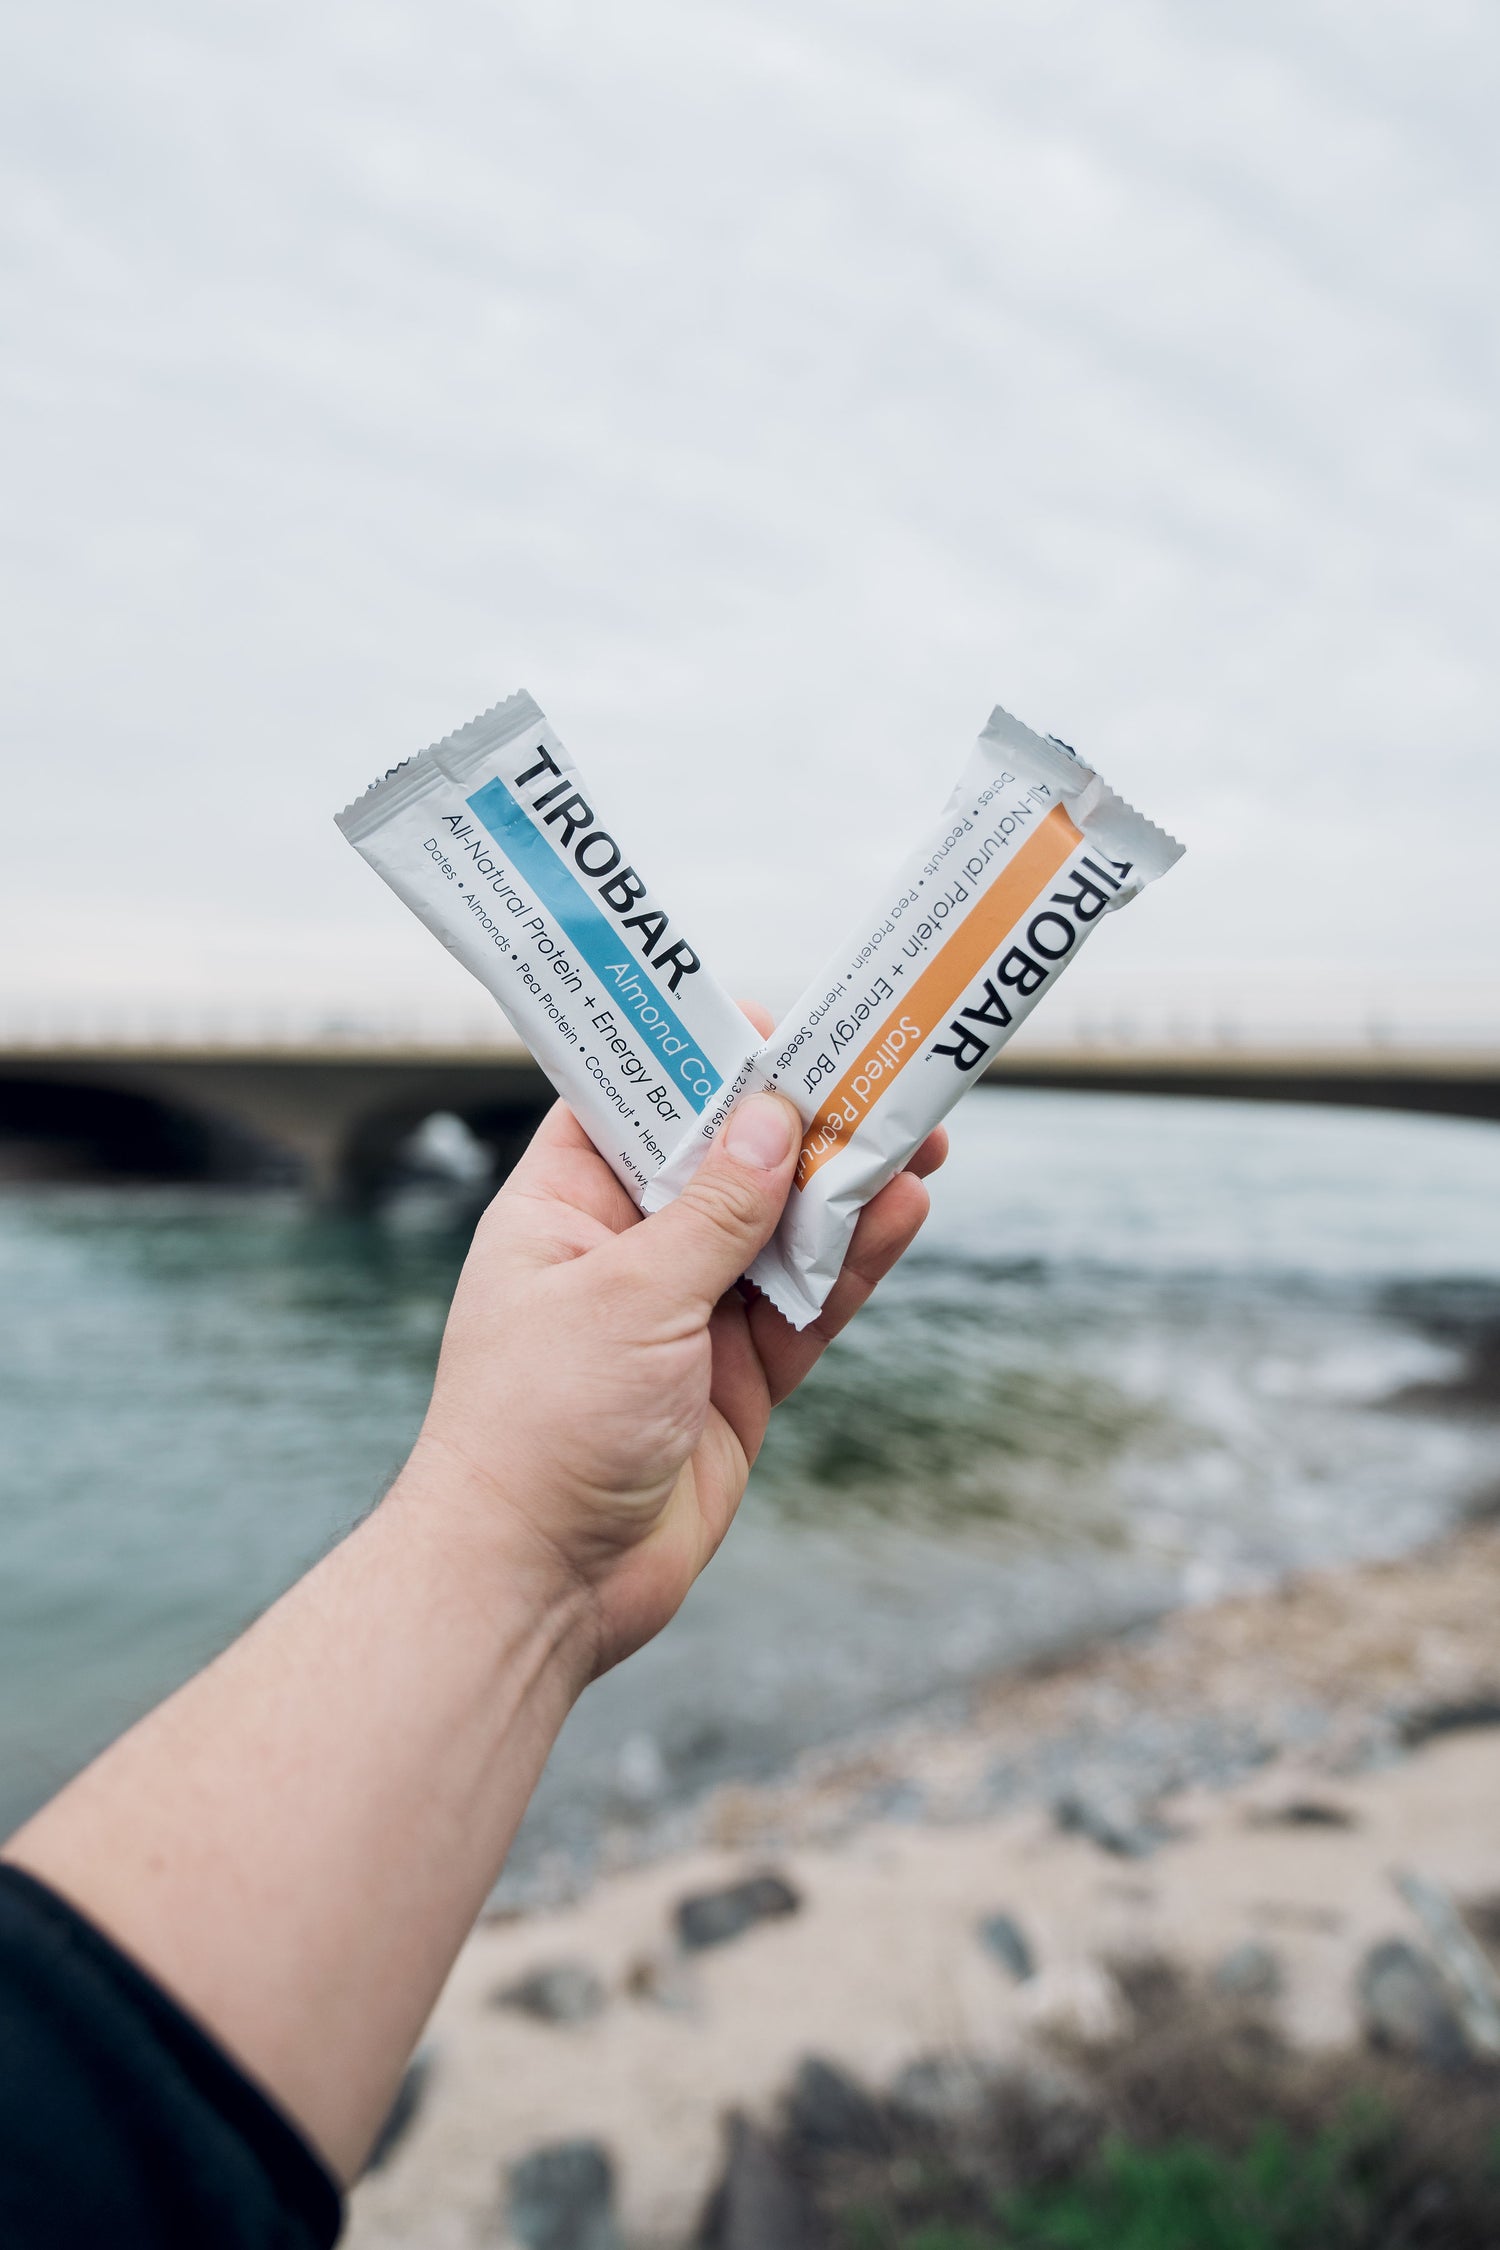 Enjoy Tirobar Protein Bars on the Go: A Pair of Tasty Bars with Scenic View of Water and Bridge in the Background